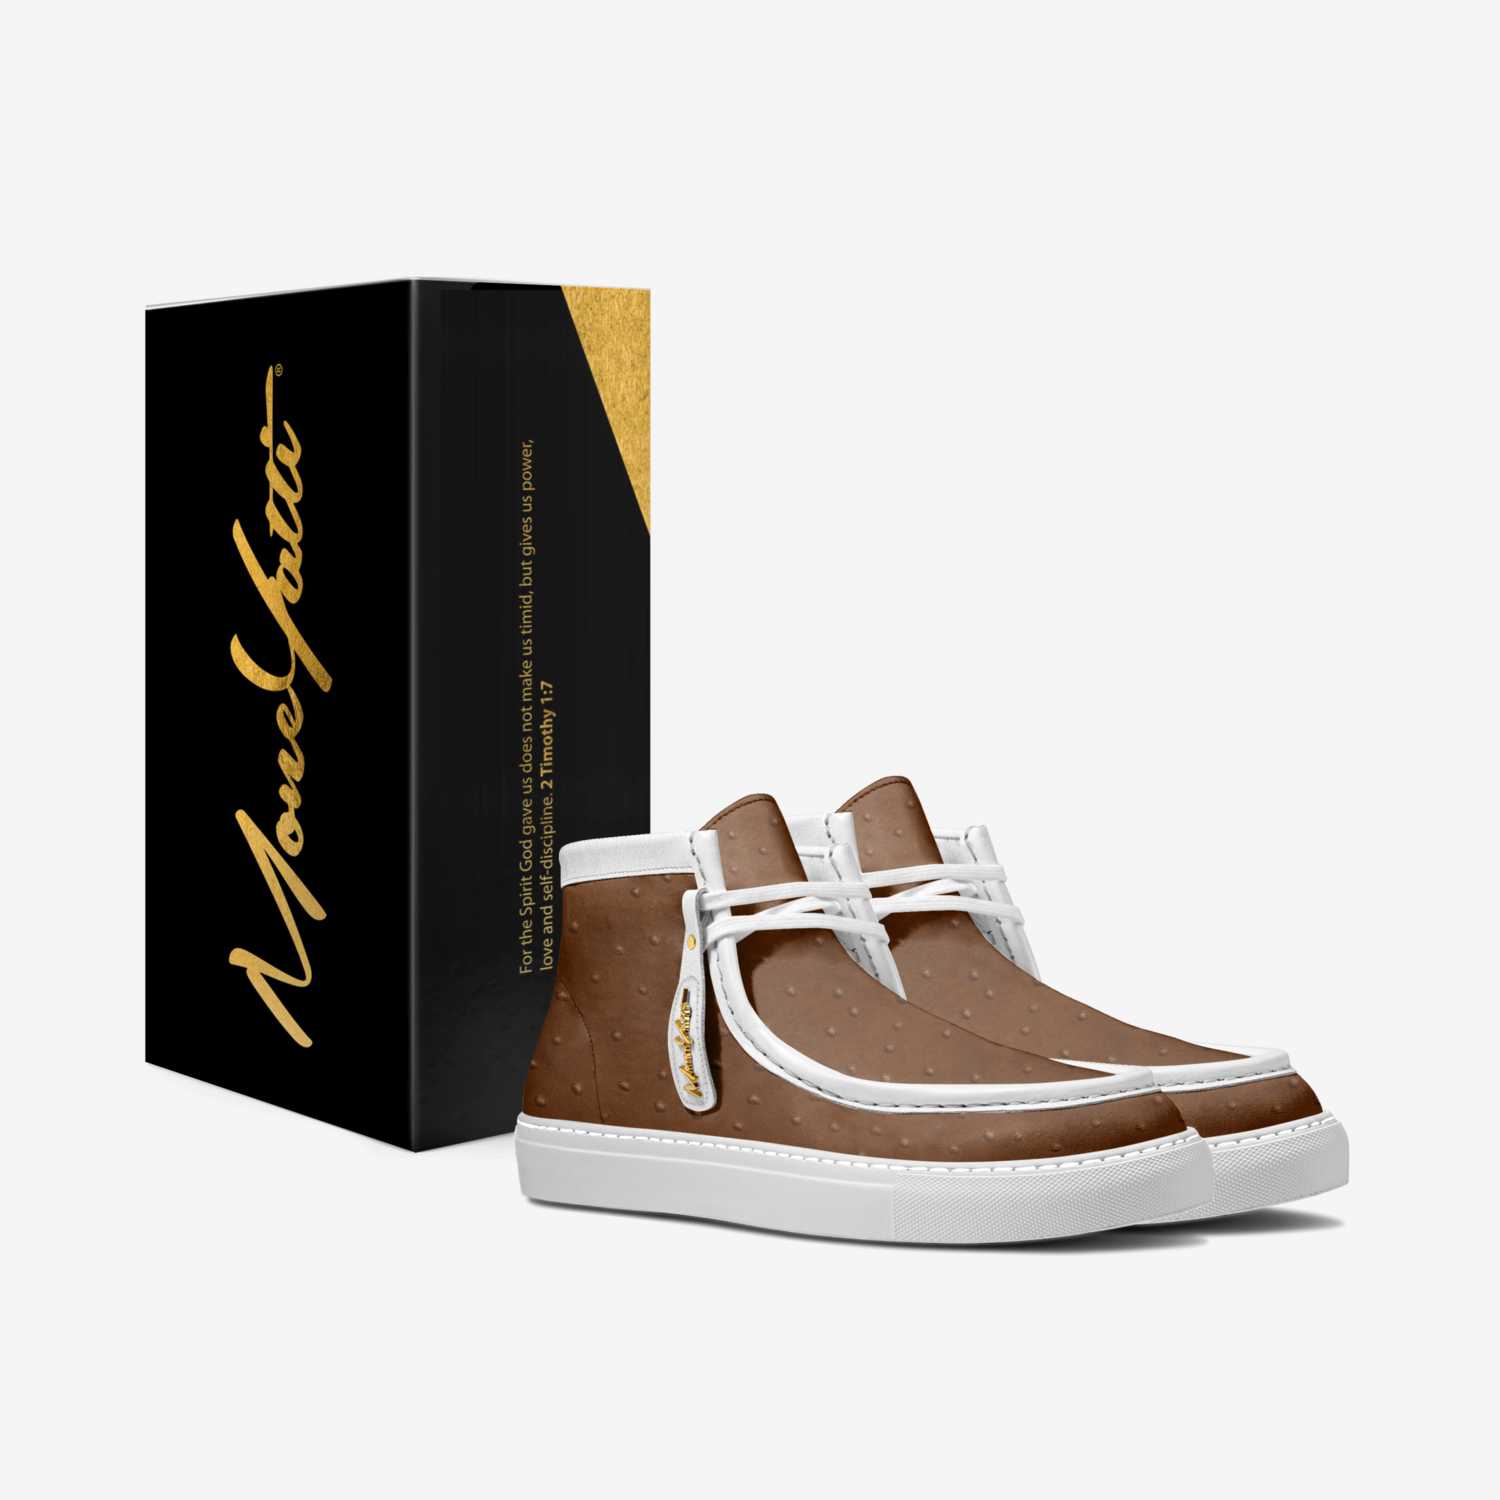 LUX 008 custom made in Italy shoes by Moneyatti Brand | Box view